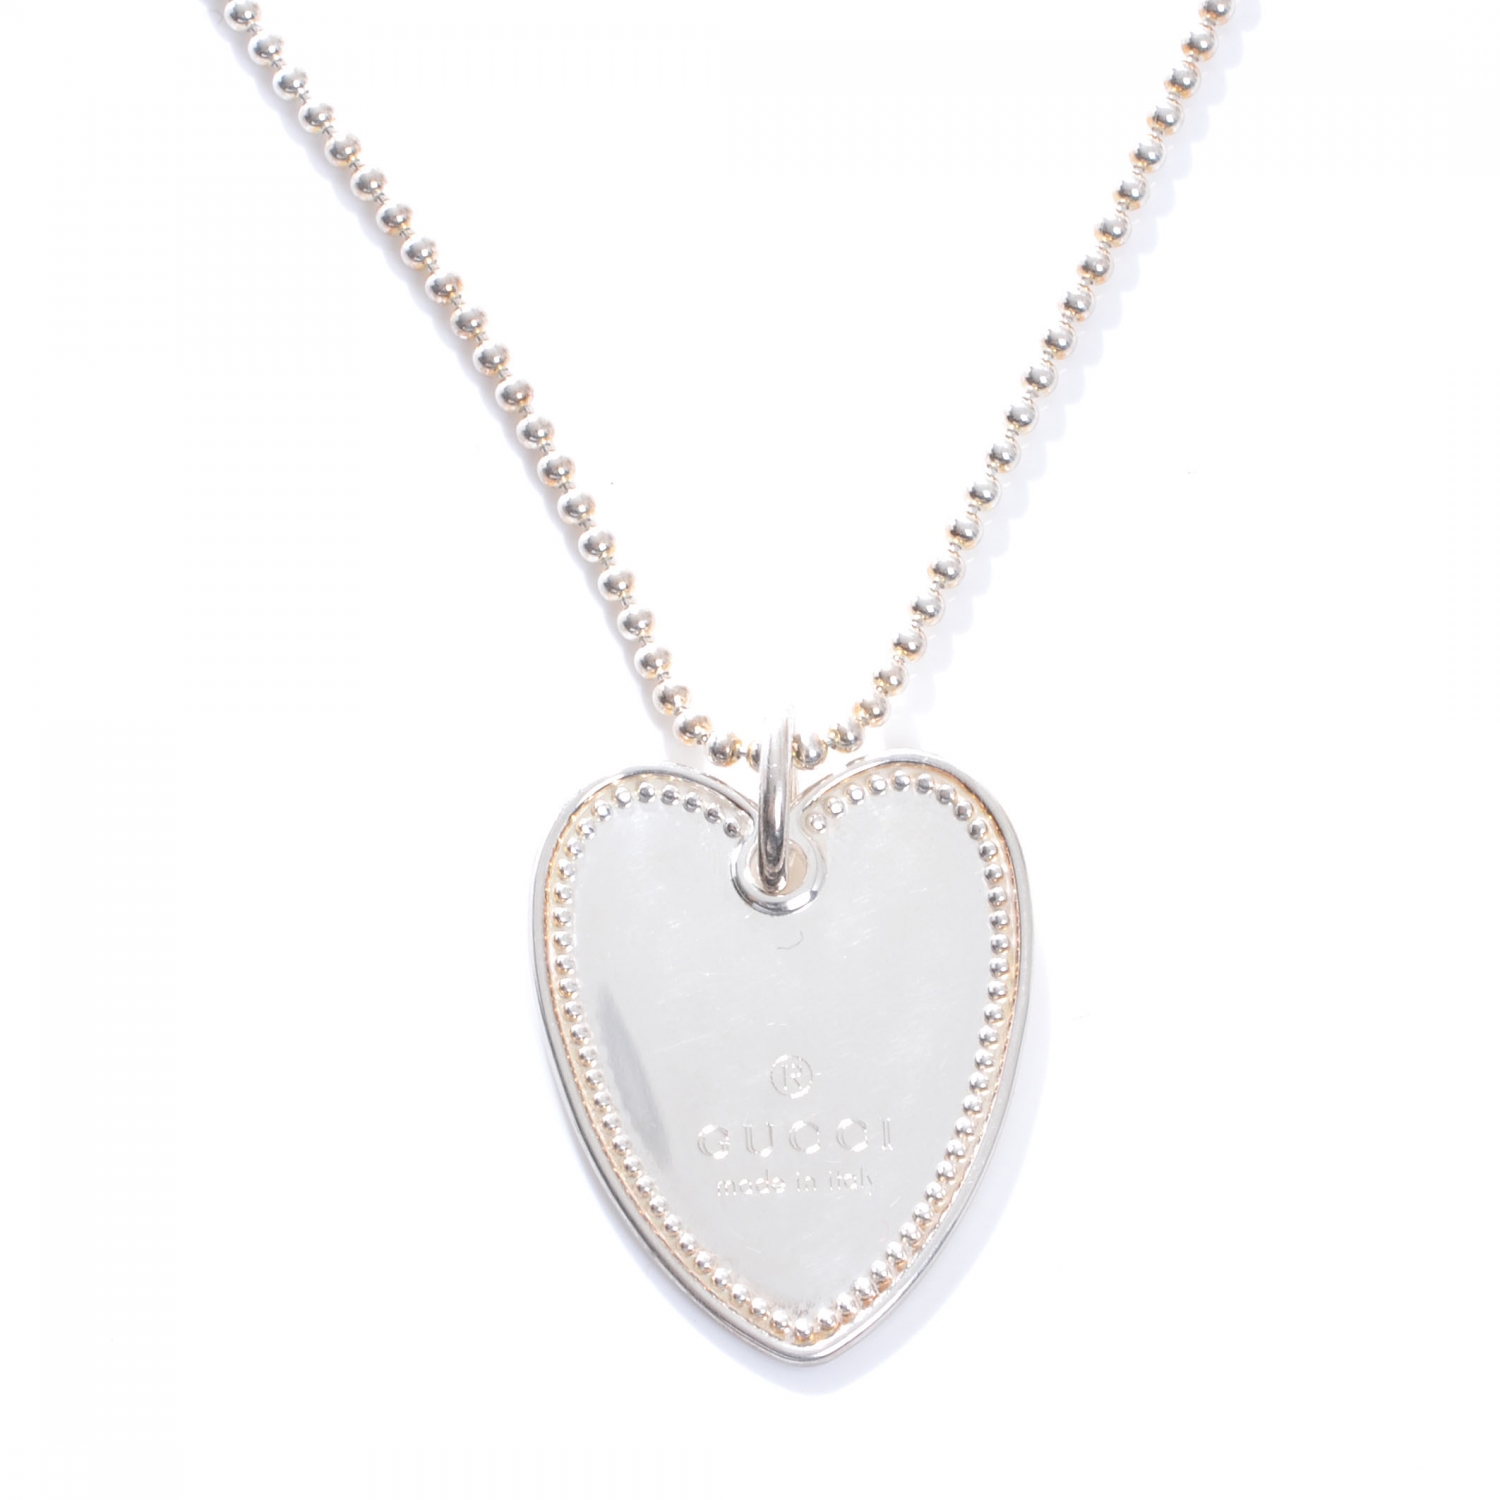 GUCCI Sterling Silver Heart Tag Necklace 44566